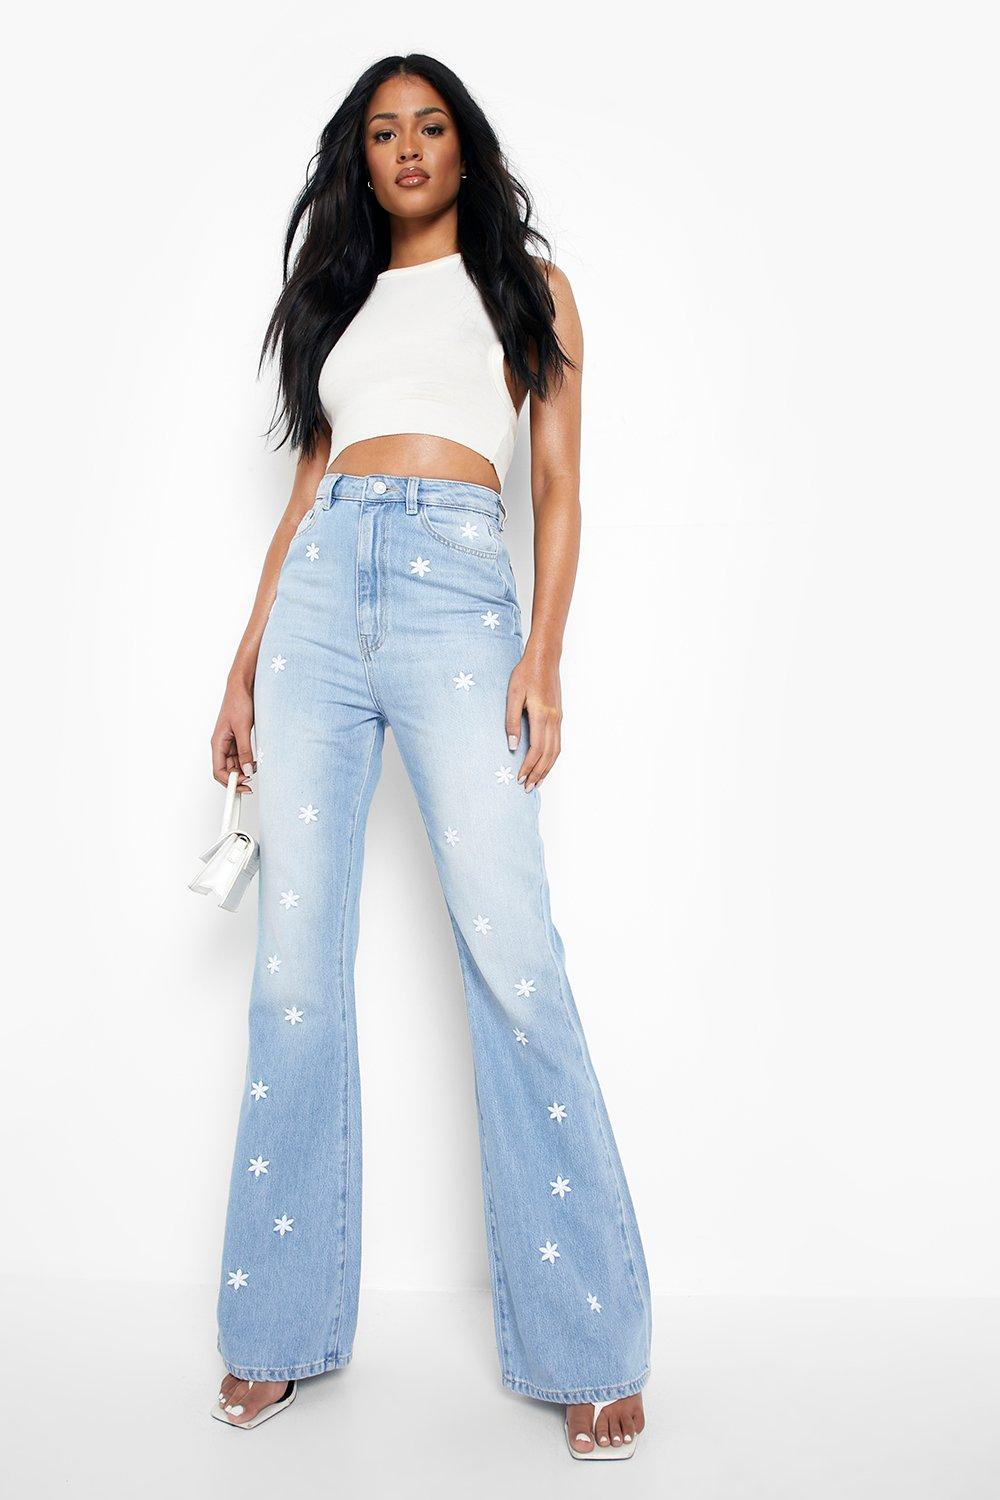 Nasty Gal Womens Sequin Embroidered Flare Jean - Light Blue